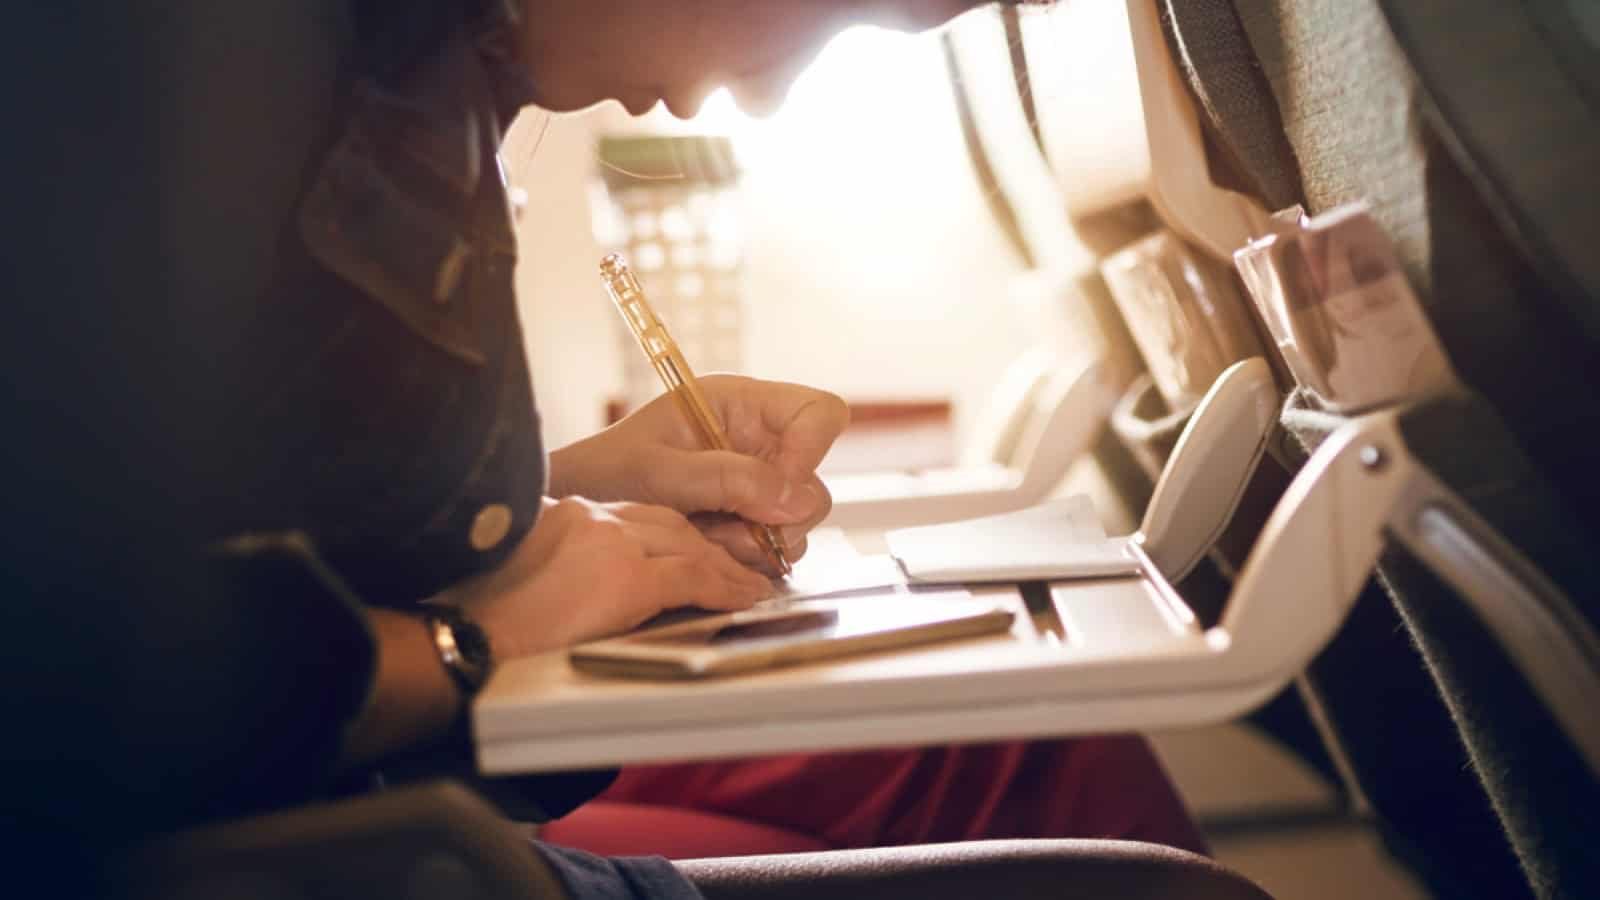 Tourist filling immigration form with pen in flight